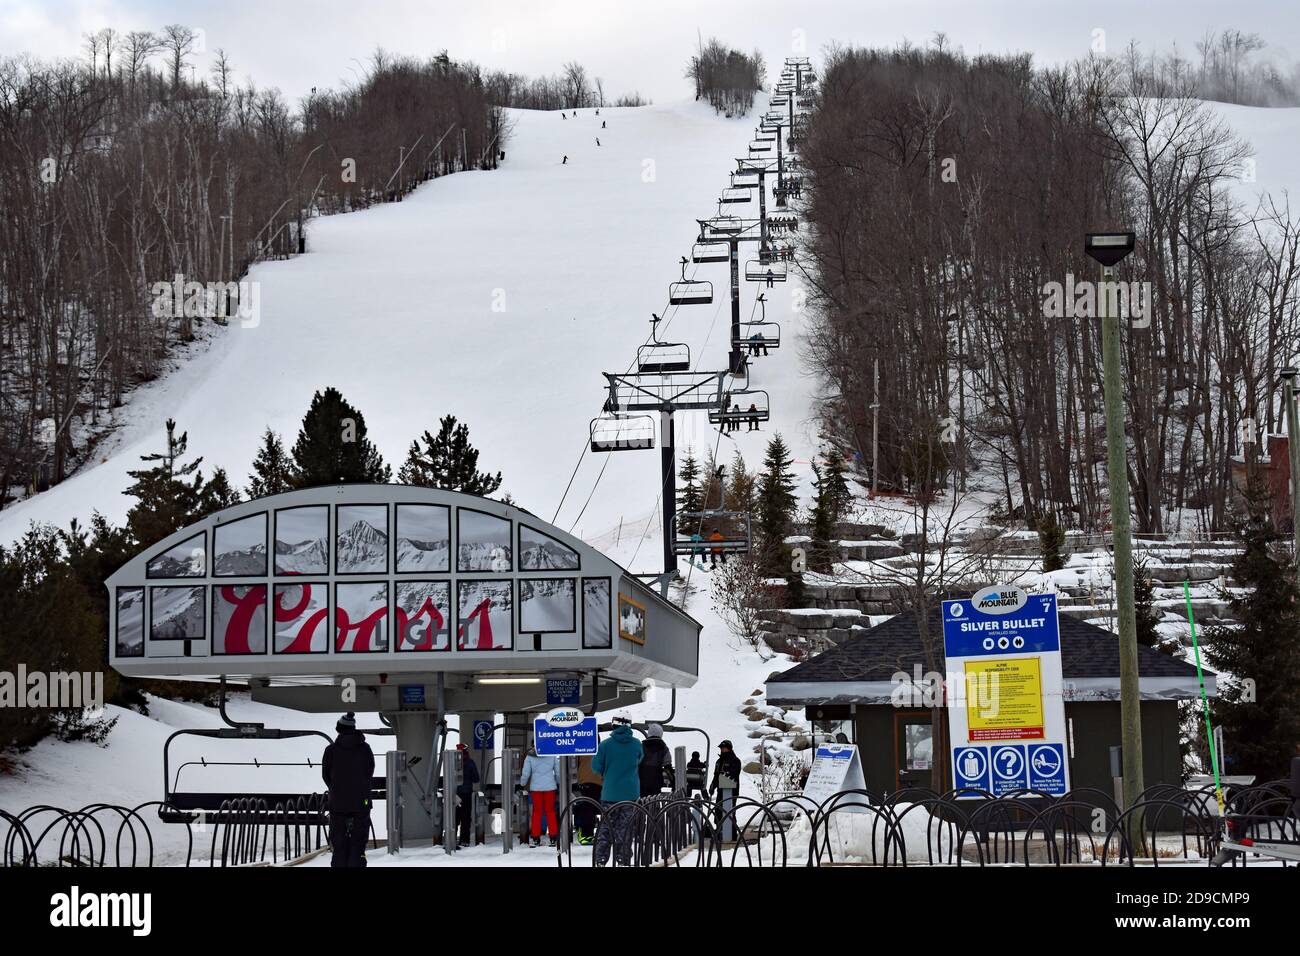 A chairlift for skiers and snowboarders named the Silver Bullet at Blue Mountain Resort in Ontario, Canada.  Advertising for Coors is on the Chairlift. Stock Photo